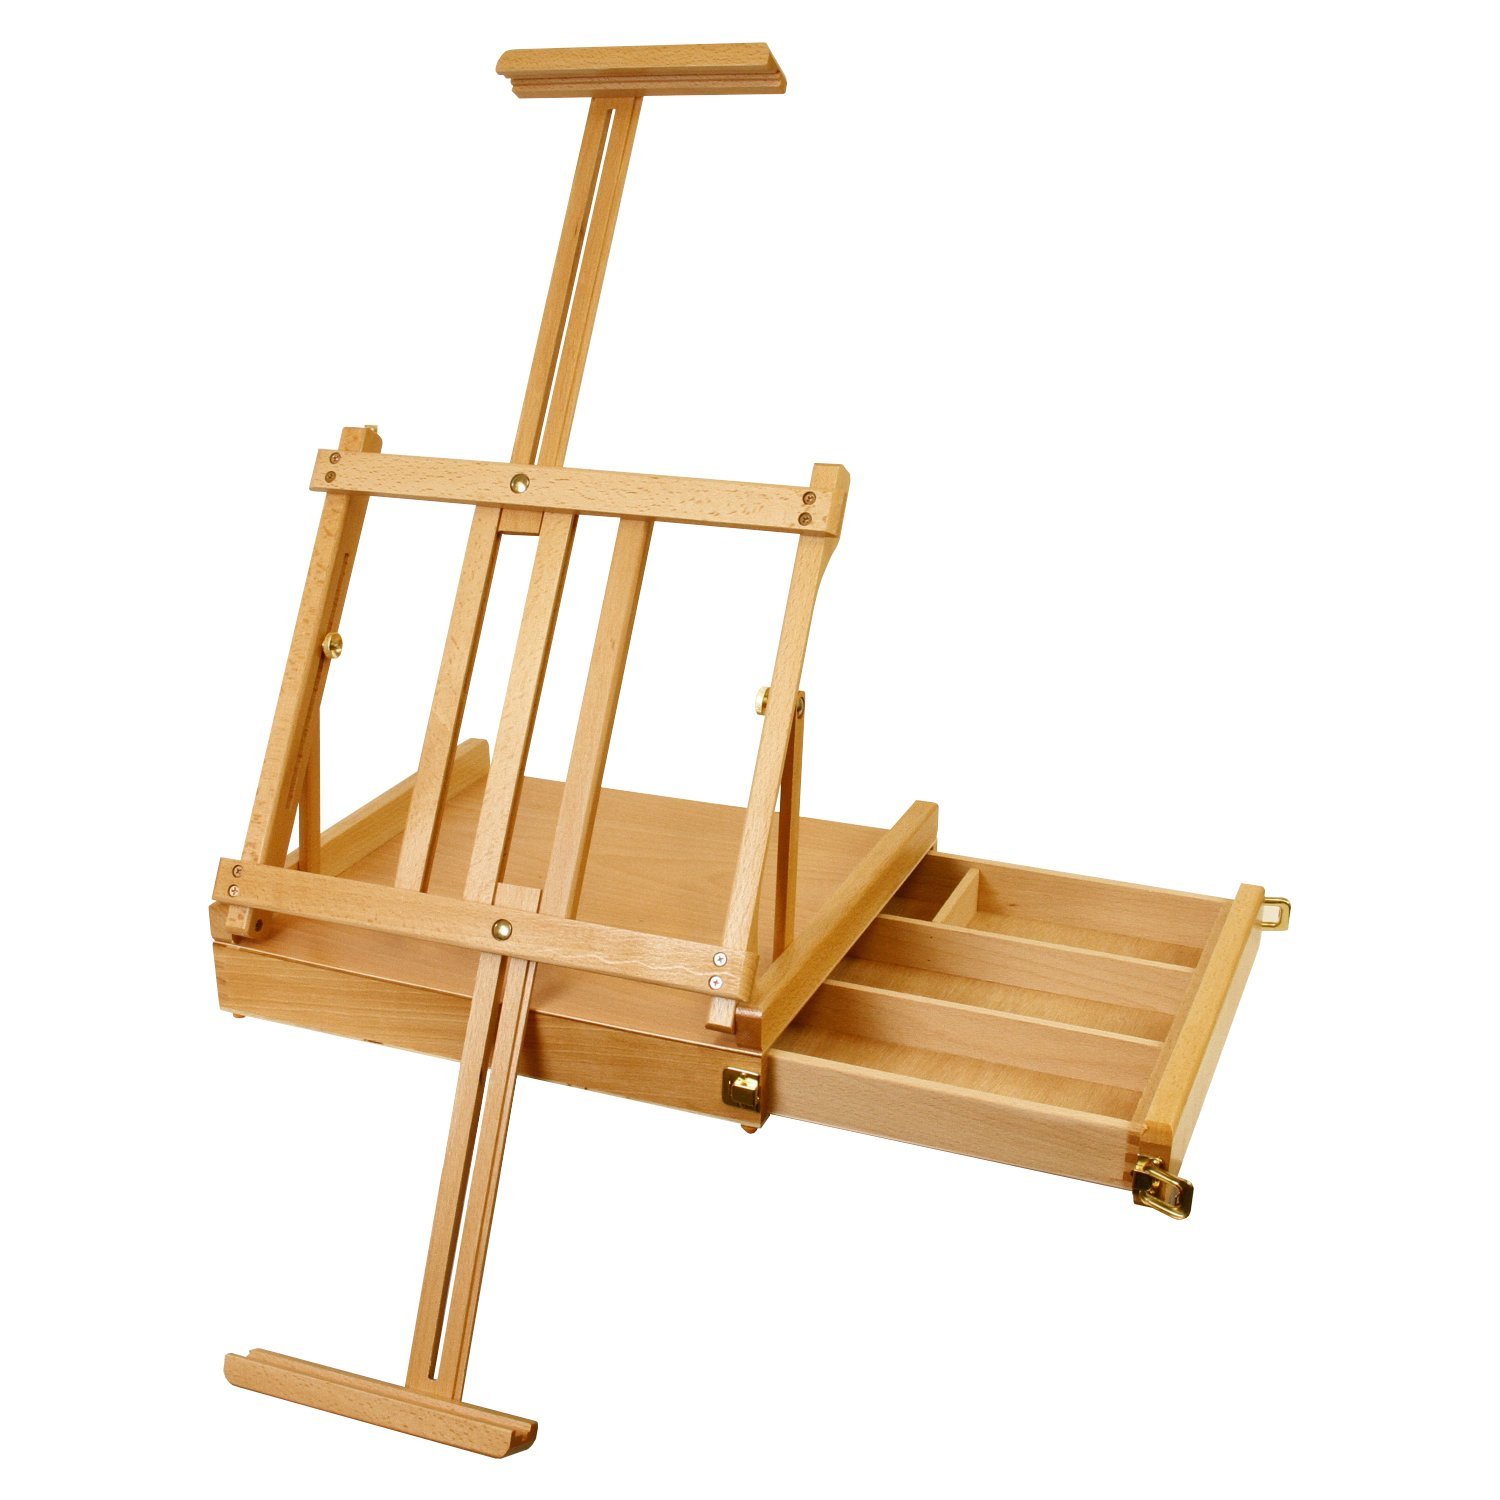 Small easels for table-top